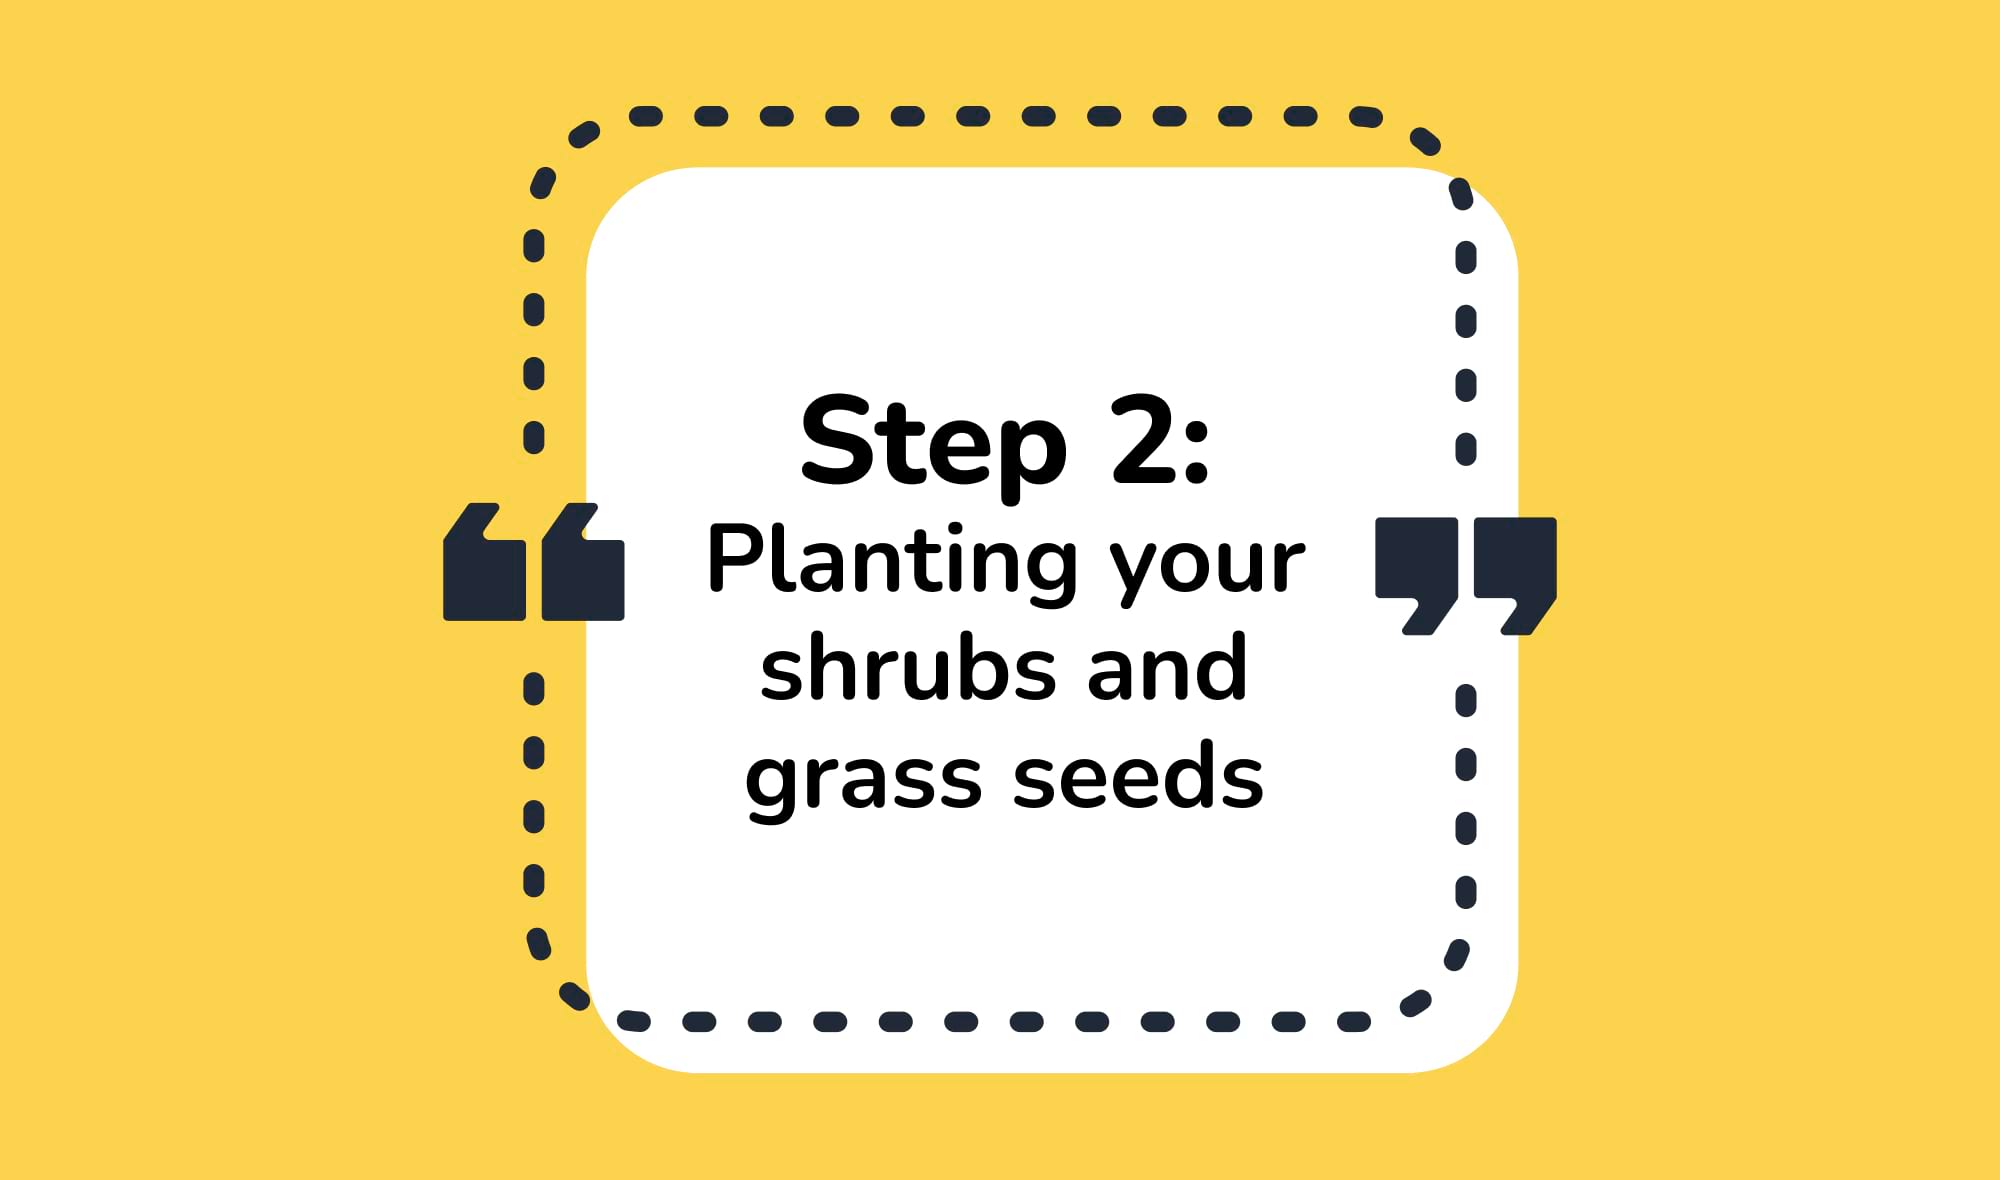 Step 2: Planting your shrubs and grass seeds